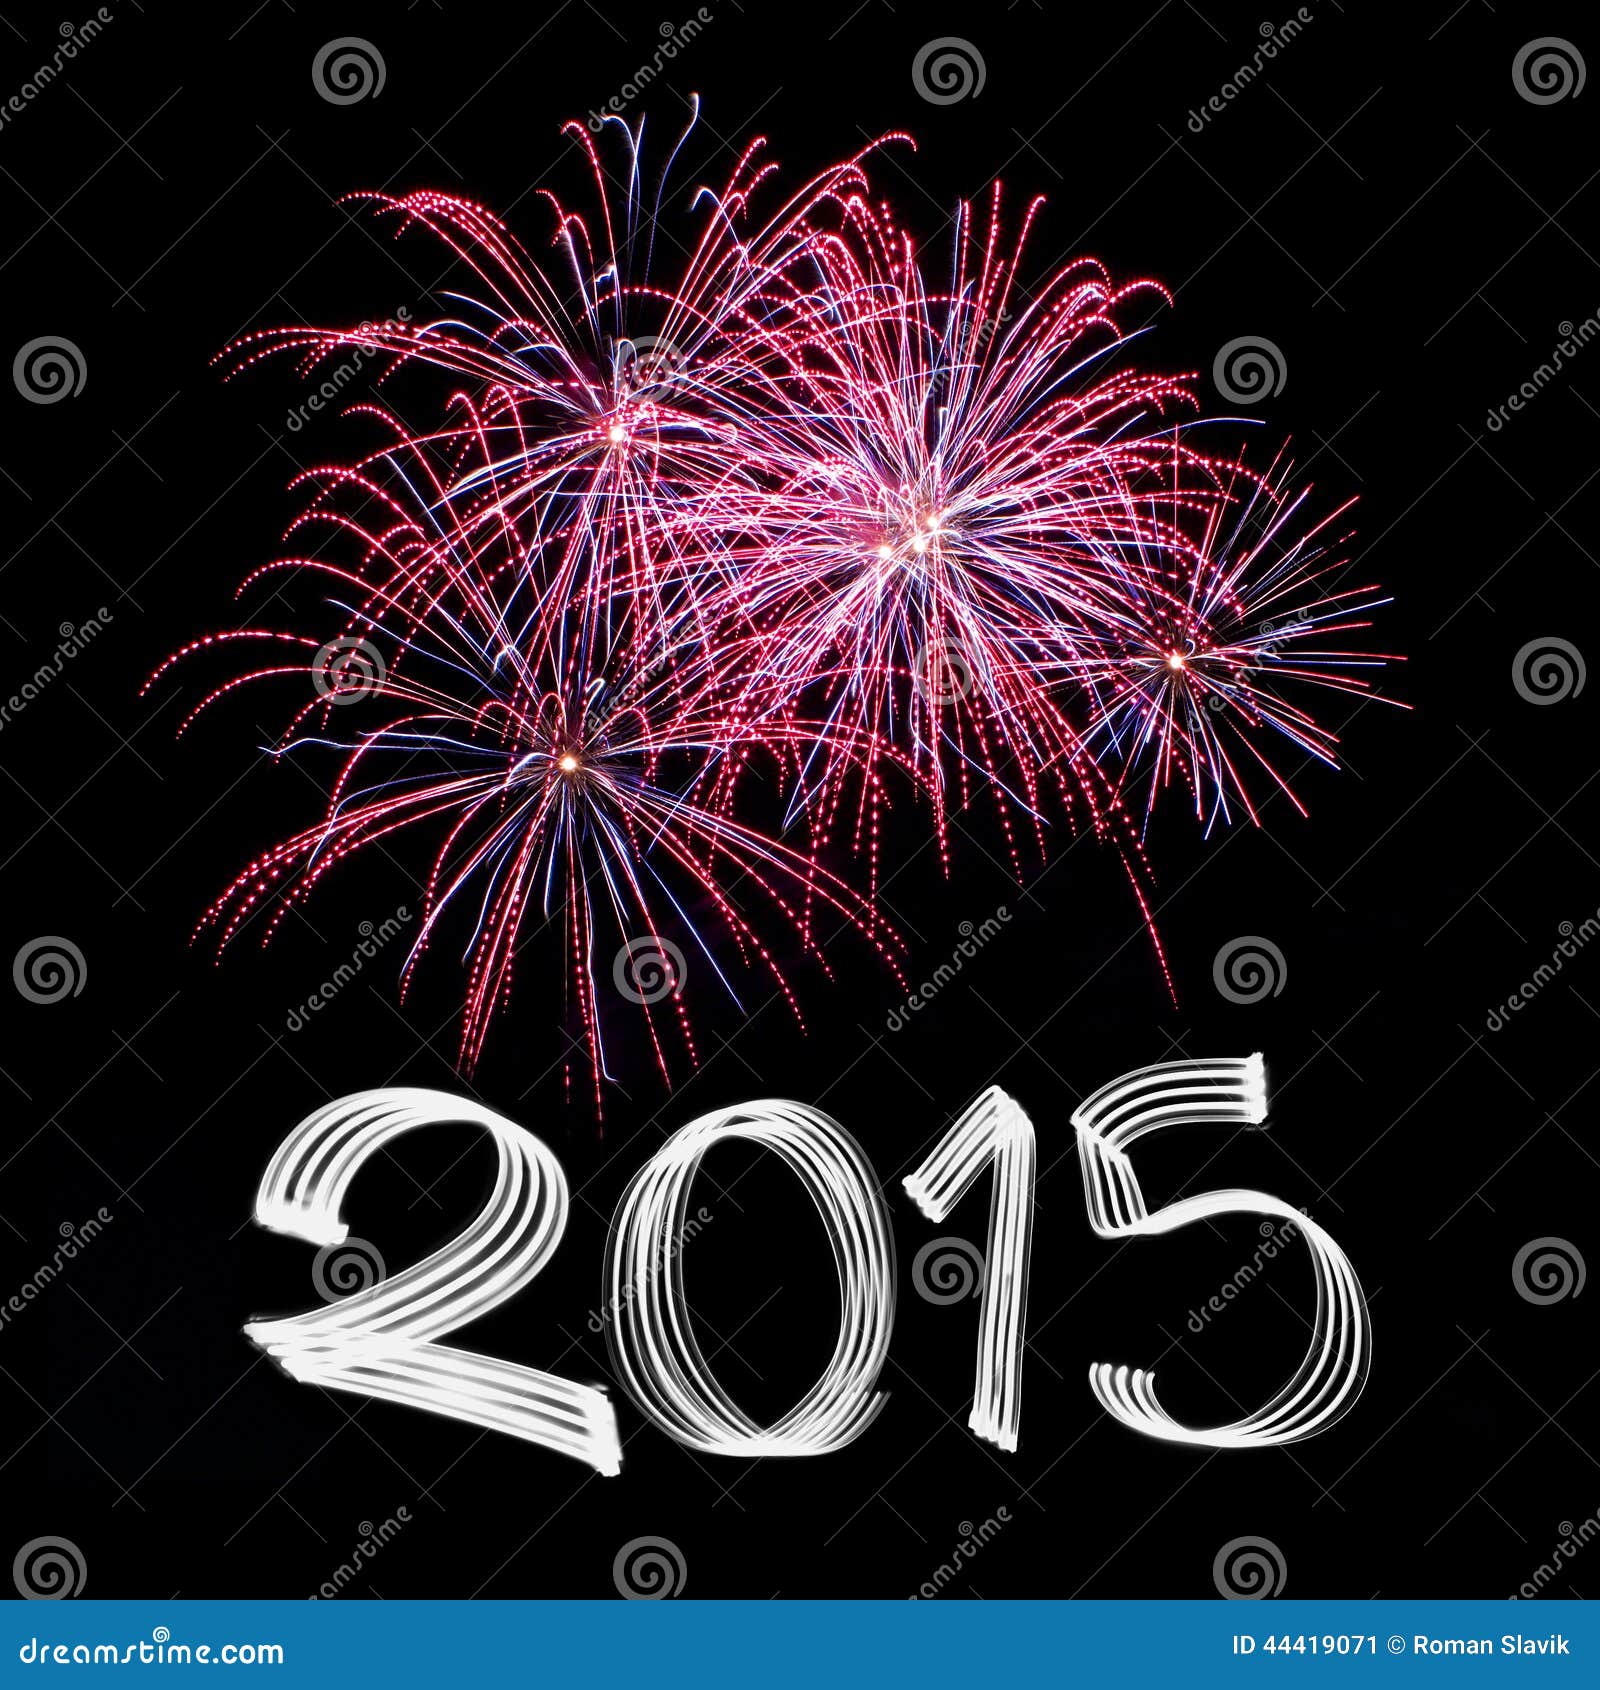 New Year S Eve 2015 with Fireworks Stock Image - Image of blue, light ...
 New Years Fireworks Wallpaper 2015